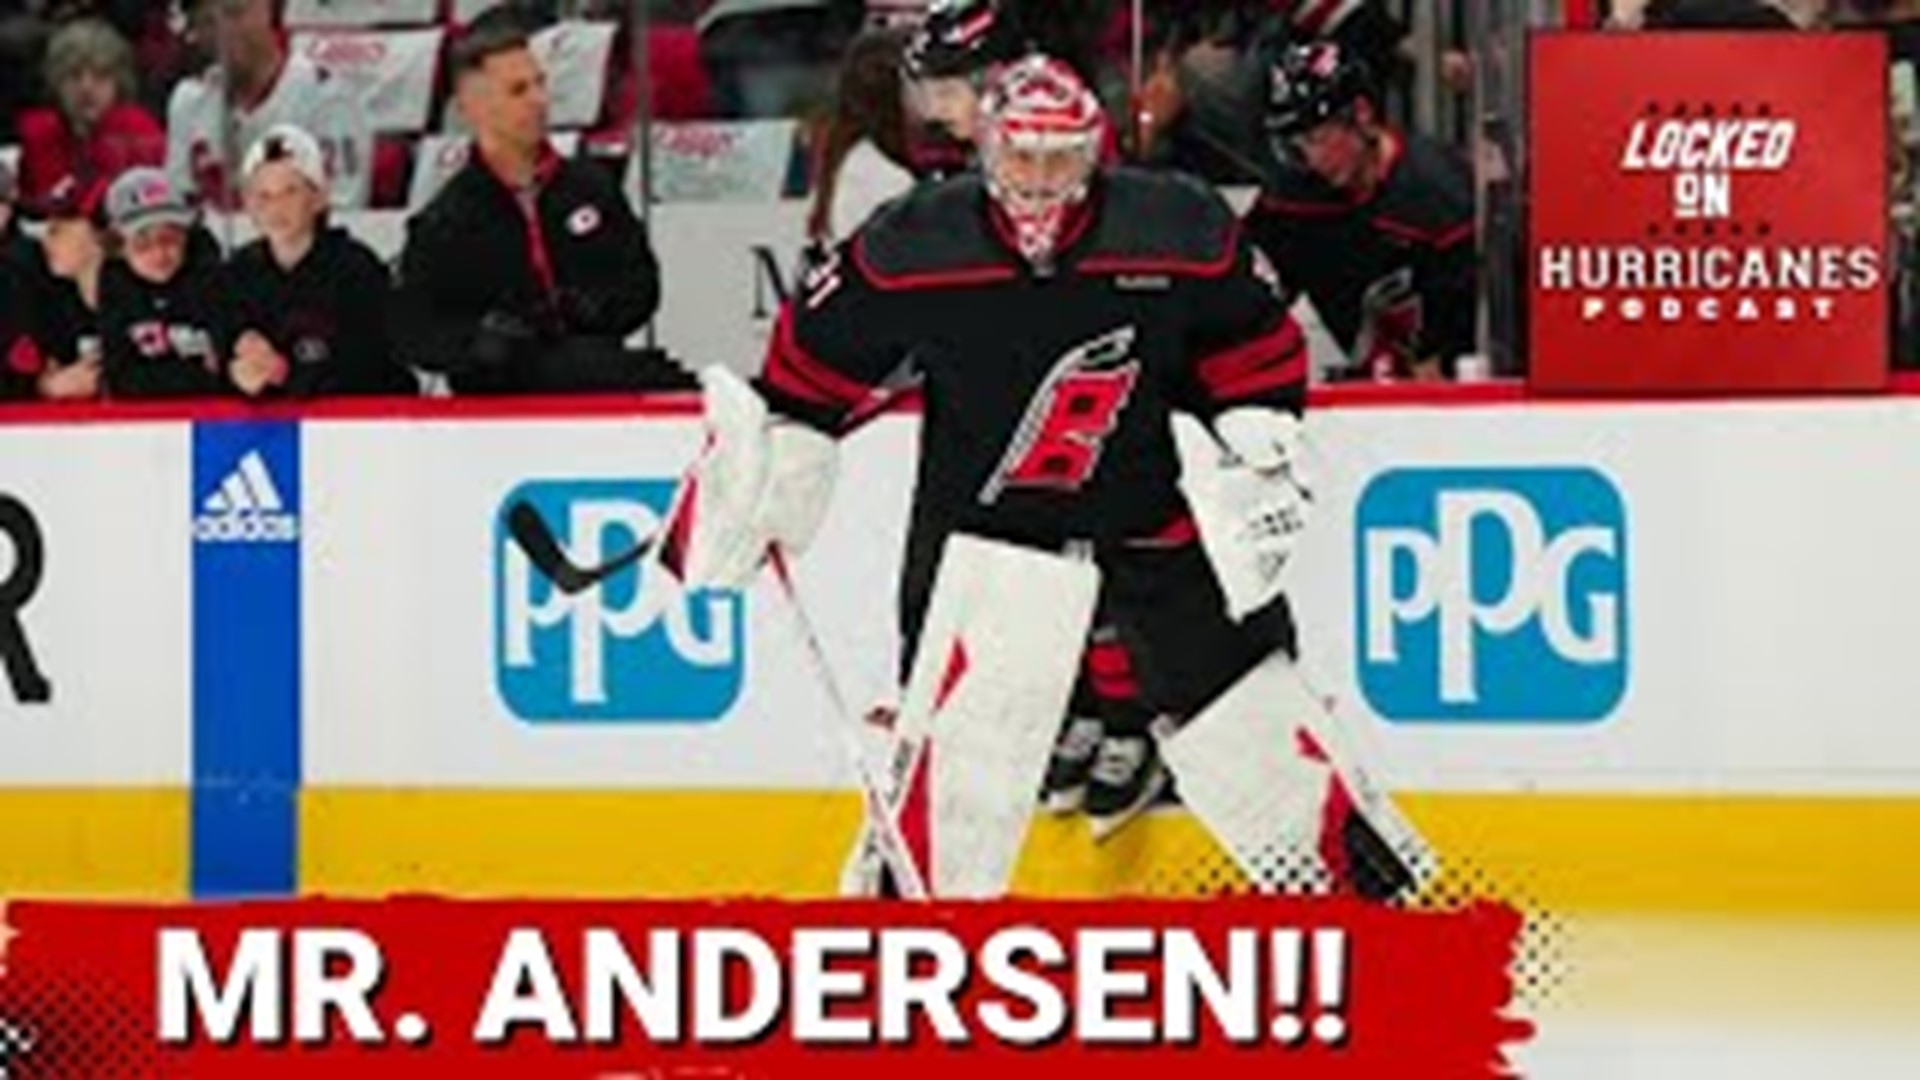 Frederik Andersen stood tall for the Hurricanes in the win on the back of a 34-save performance. That and more on Locked On Hurricanes.